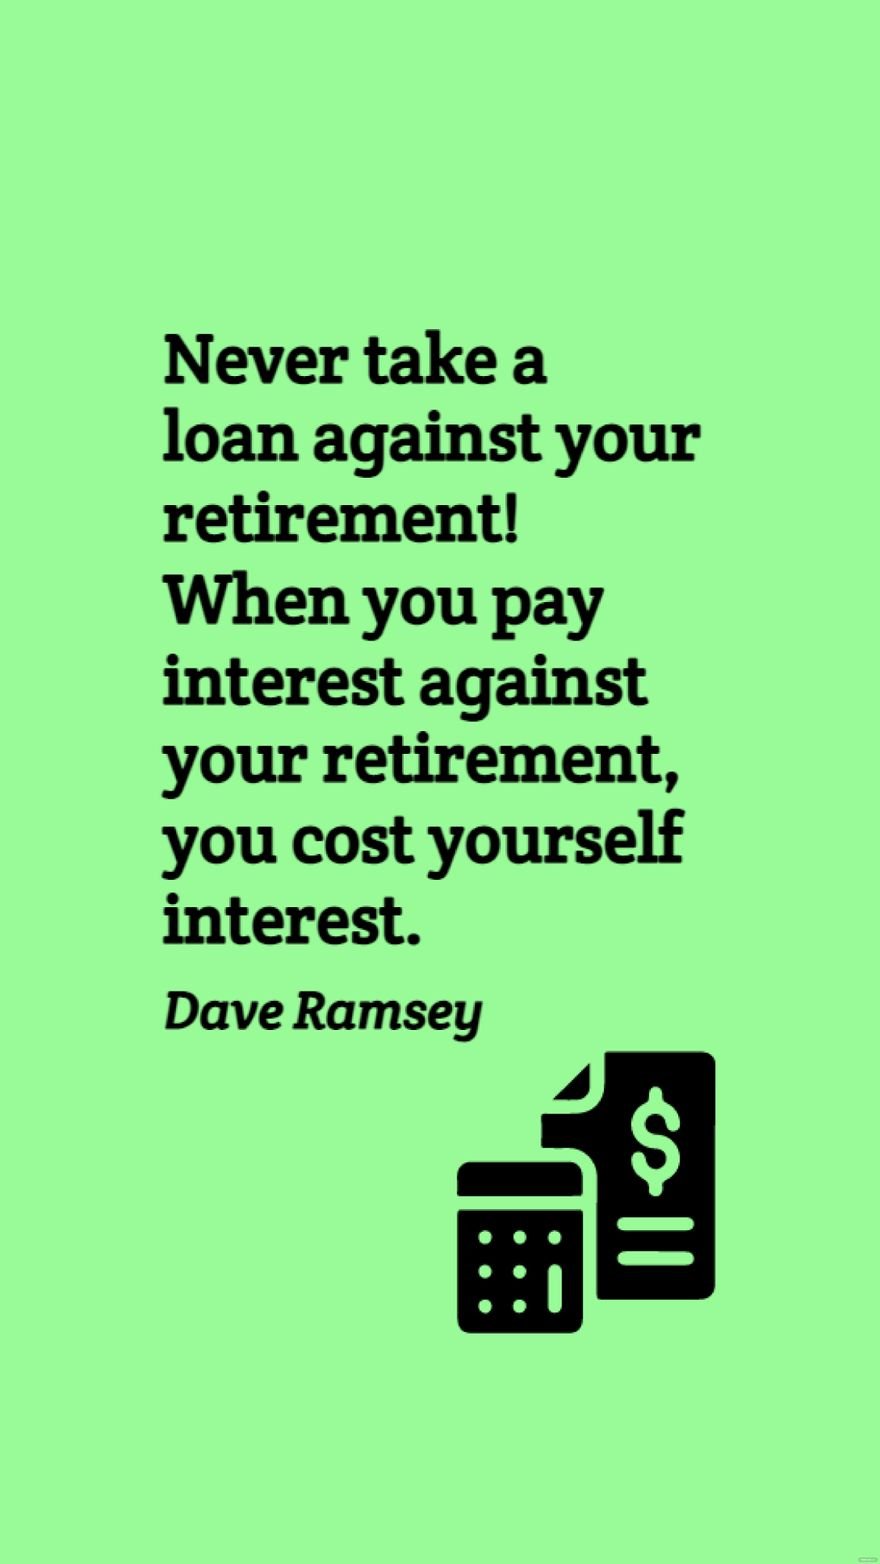 Dave Ramsey - Never take a loan against your retirement! When you pay interest against your retirement, you cost yourself interest.